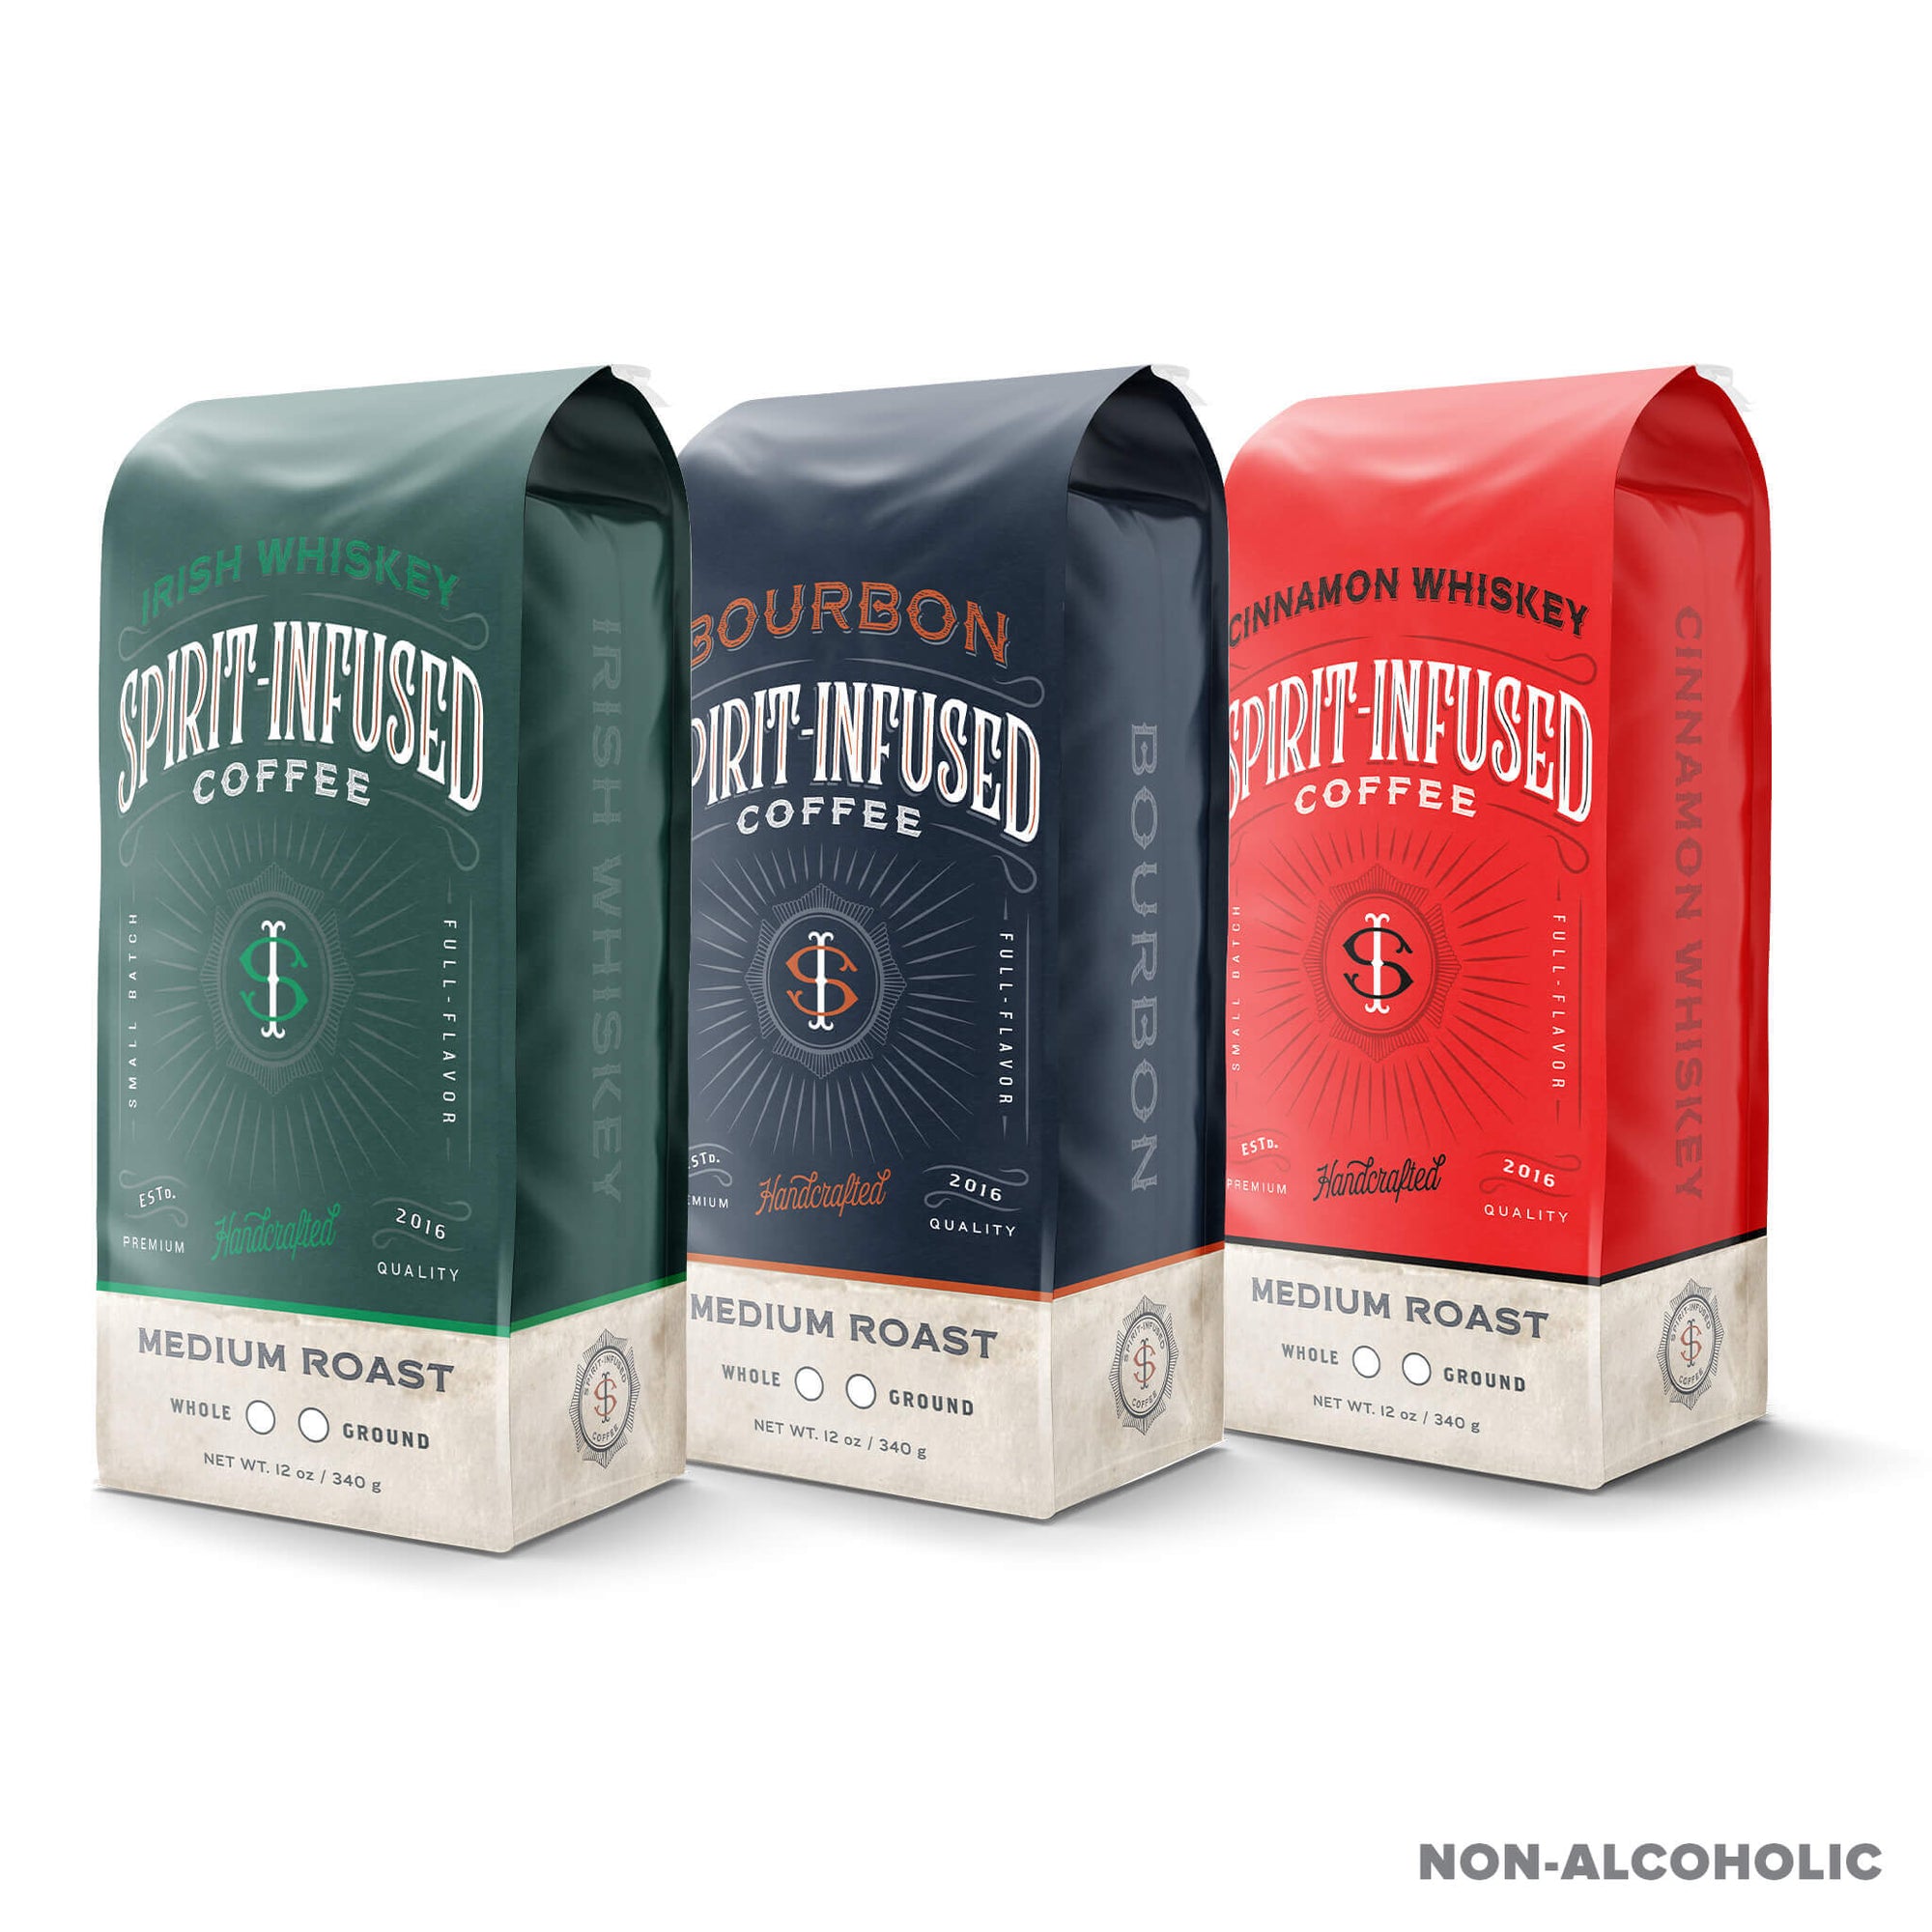 Three bags of Fire Department Coffee's Spirit Infused Coffee. From front to back: Irish Whiskey Infused Coffee bag, Bourbon Infused Coffee bag, and Cinnamon Whiskey Infused Coffee bag. Includes a "non alcoholic" stamp in the bottom right corner.